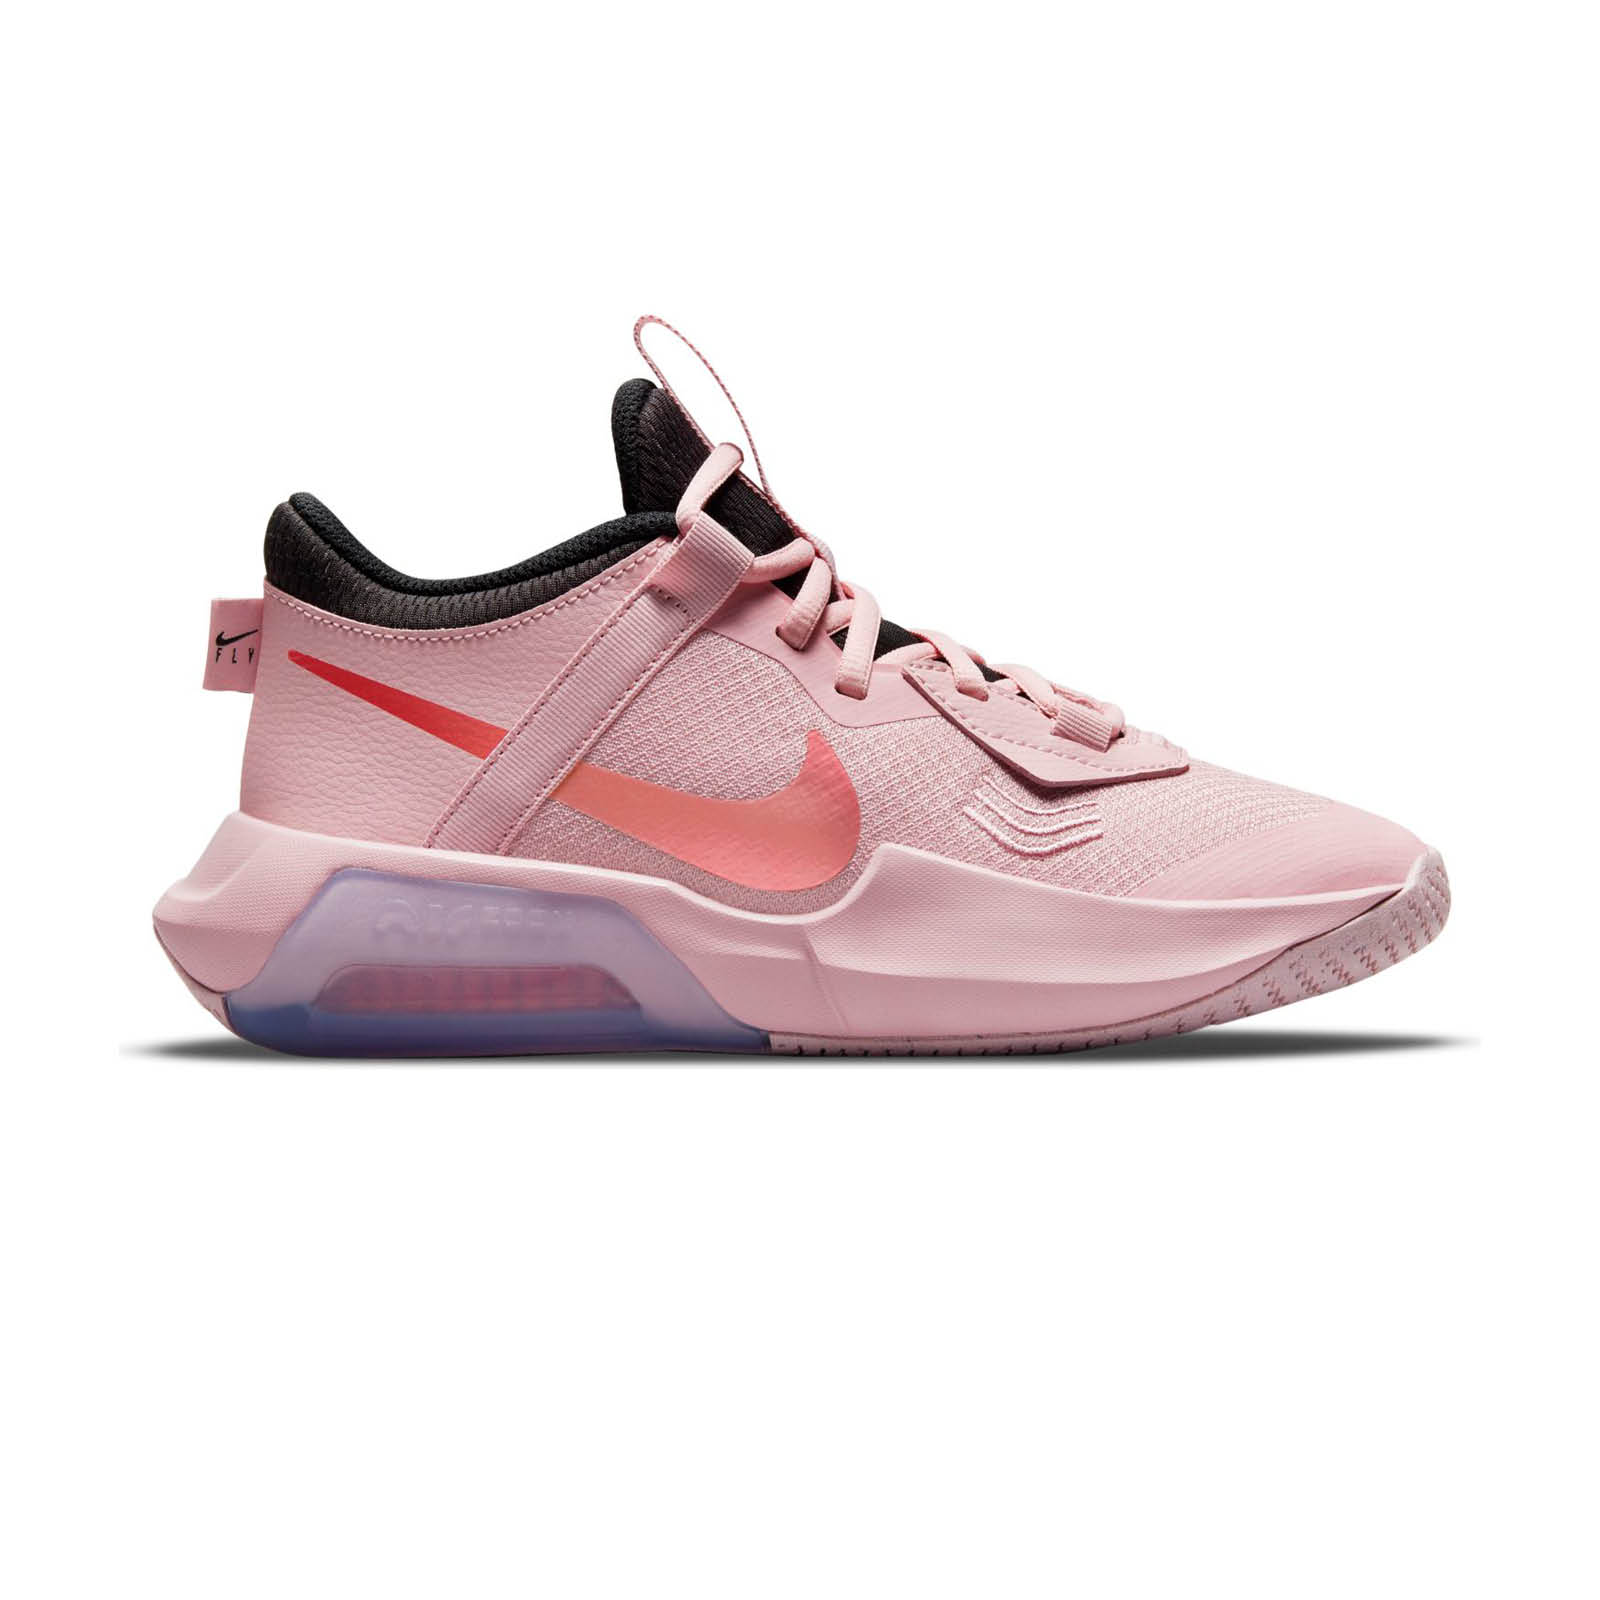 Nike - NIKE AIR ZOOM CROSSOVER (GS) - PINK GLAZE/MAGIC EMBER-BLACK Παιδικά > Παπούτσια > Αθλητικά > Παπούτσι Low Cut